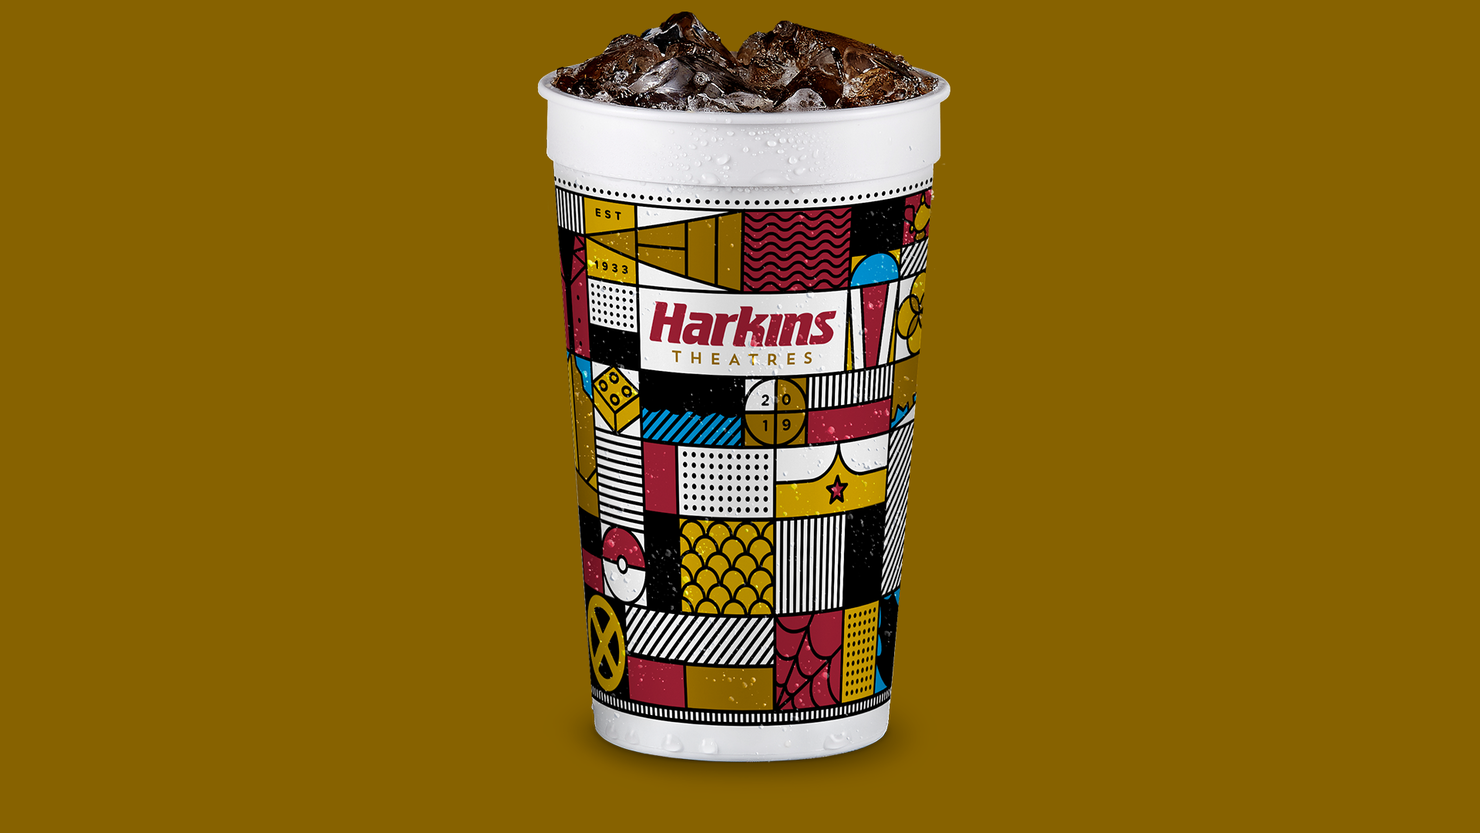 Harkins Theatres 2019 Loyalty Cups Are On Sale Now; Here's How You Can